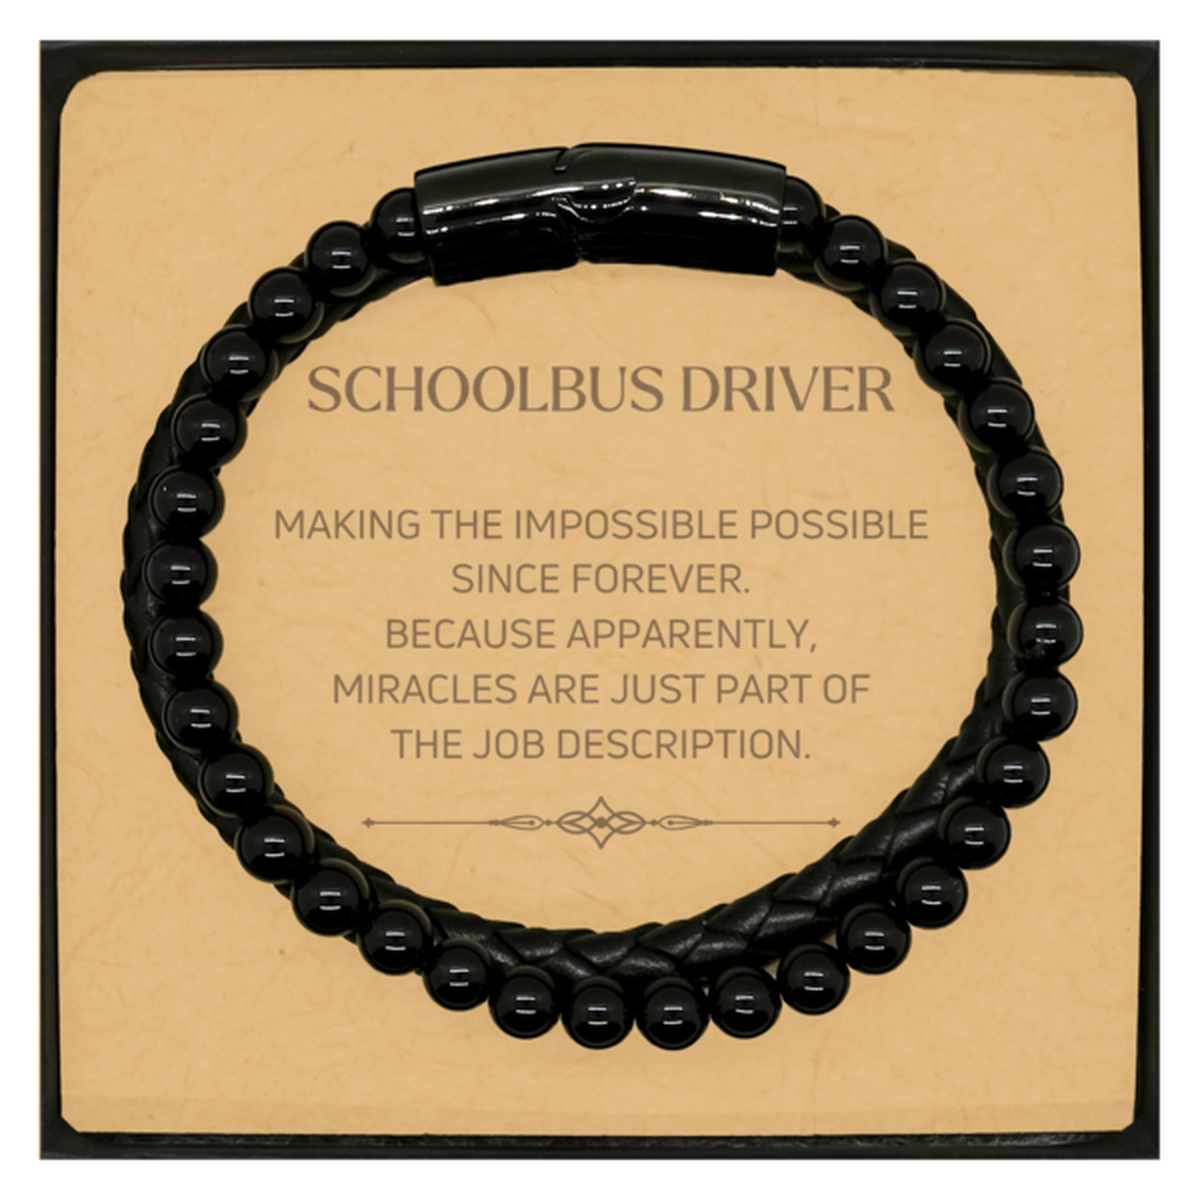 Funny Schoolbus Driver Gifts, Miracles are just part of the job description, Inspirational Birthday Christmas Stone Leather Bracelets For Schoolbus Driver, Men, Women, Coworkers, Friends, Boss